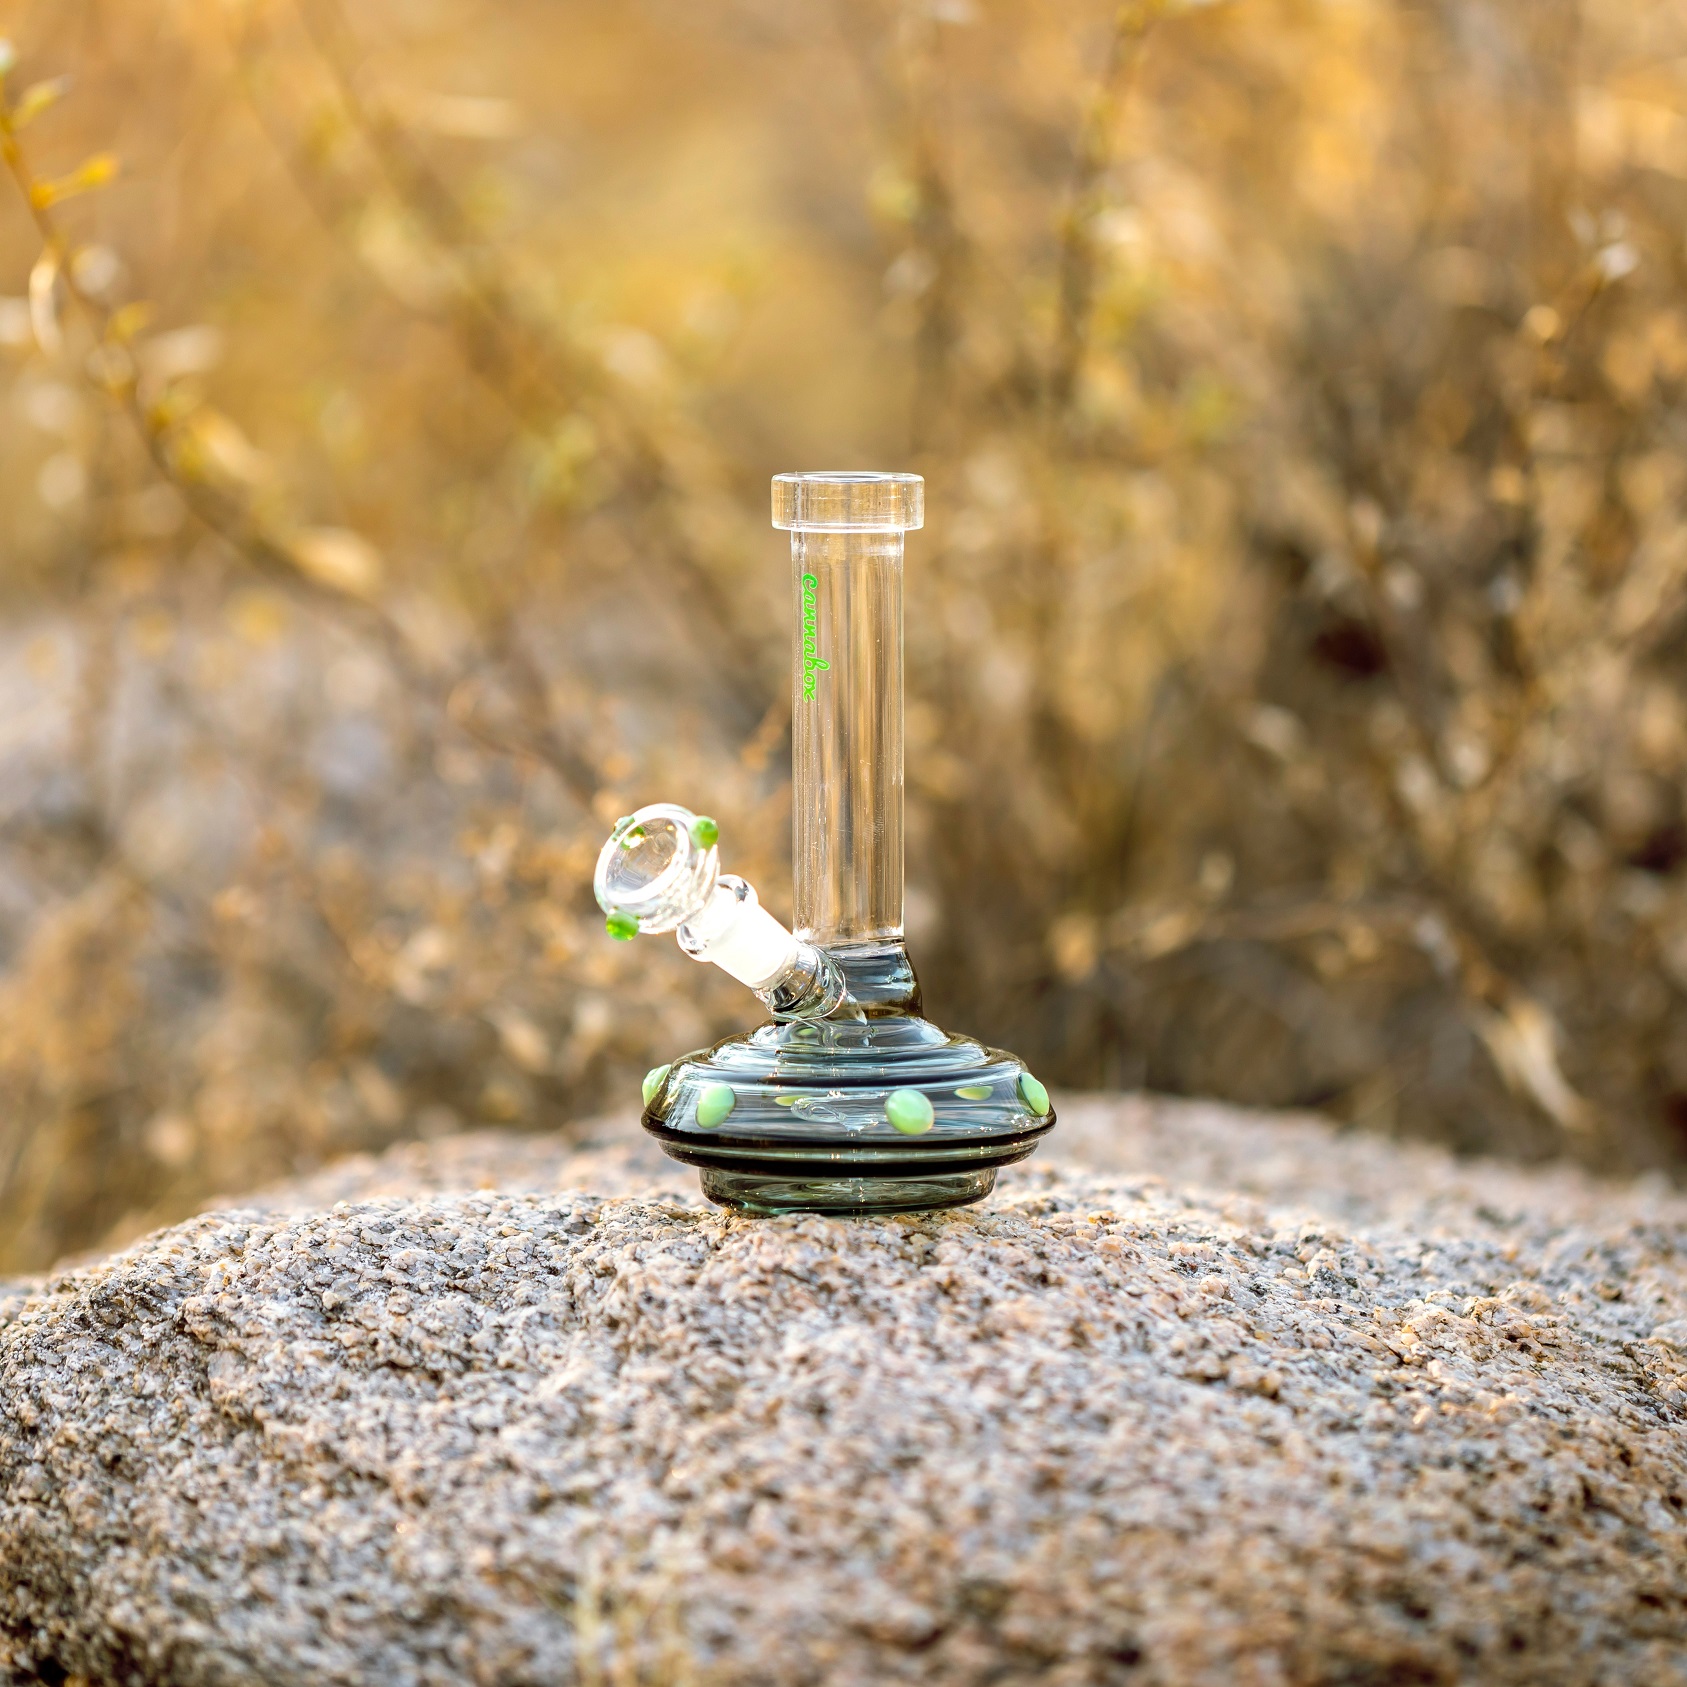 Which Bong Style is Best?